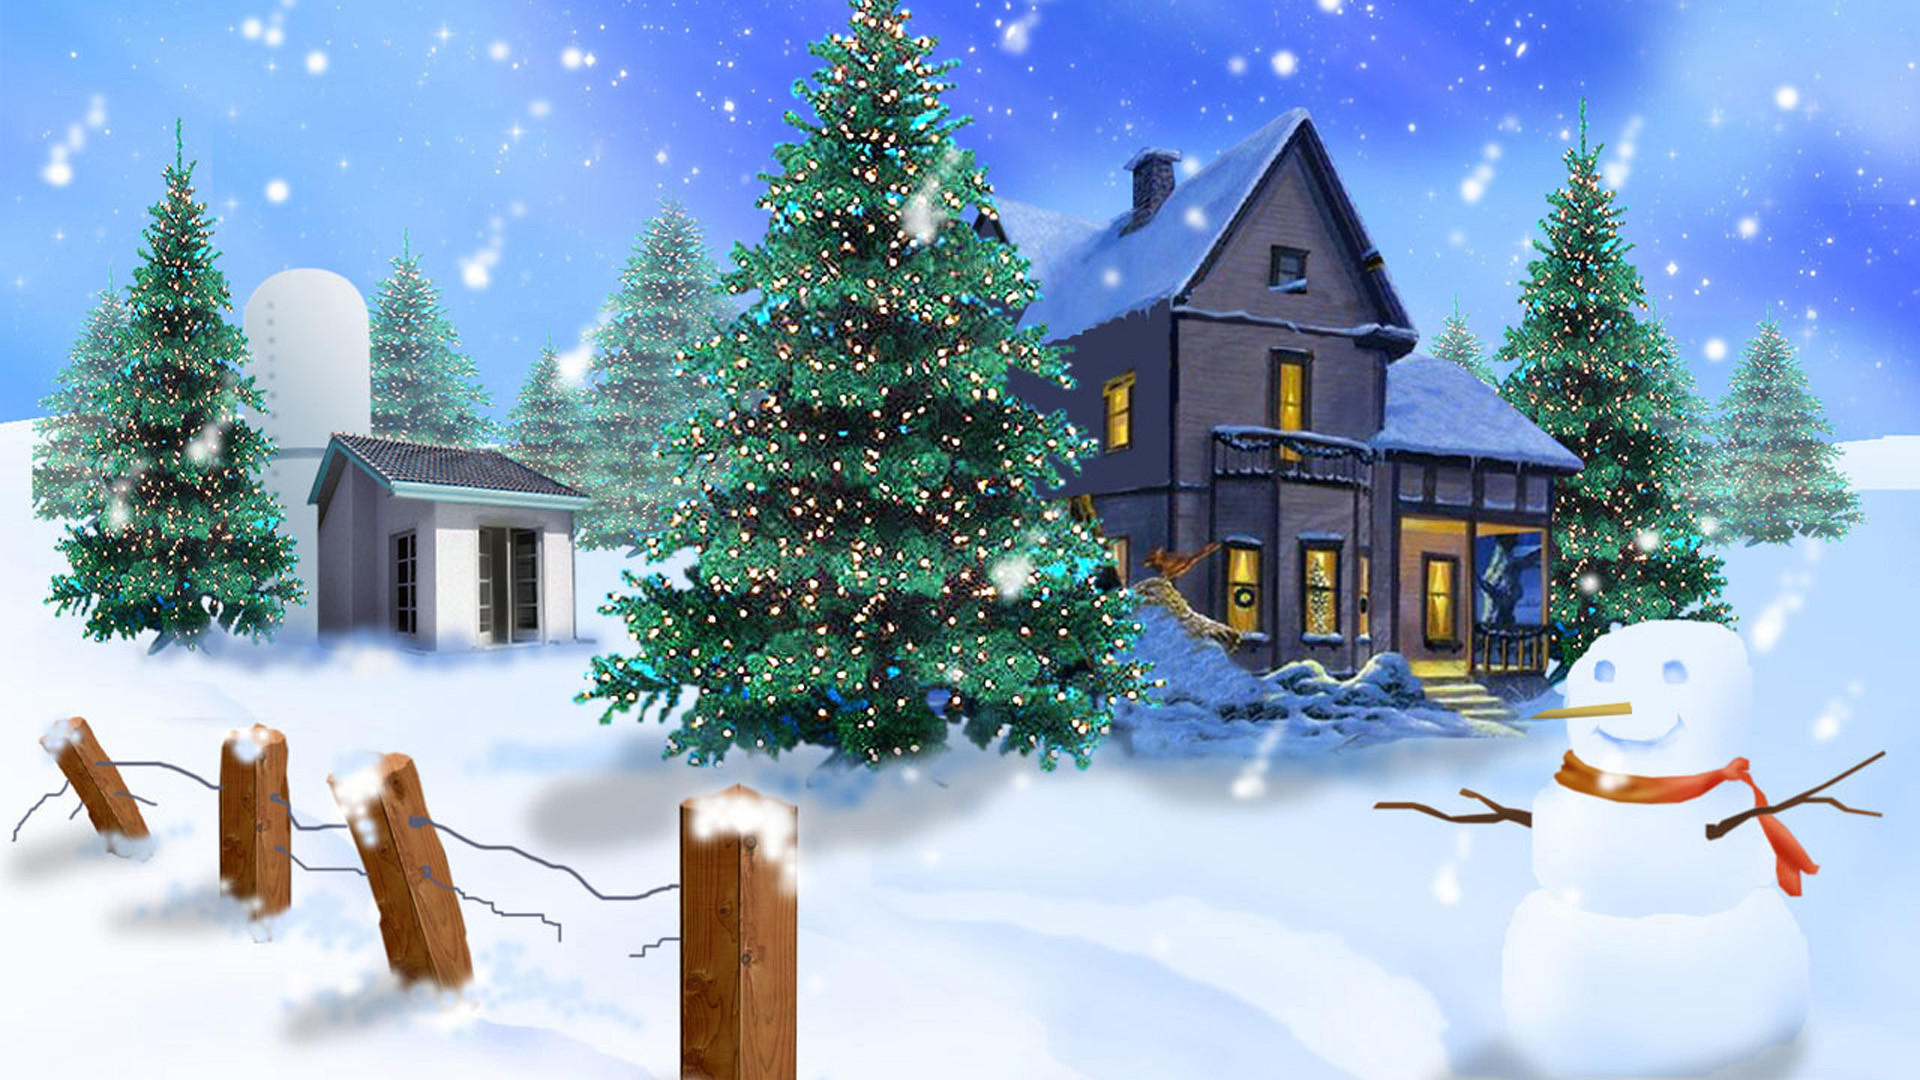 3D Christmas Wallpaper Maker – Xmas Backgrounds by Milan Trickovic